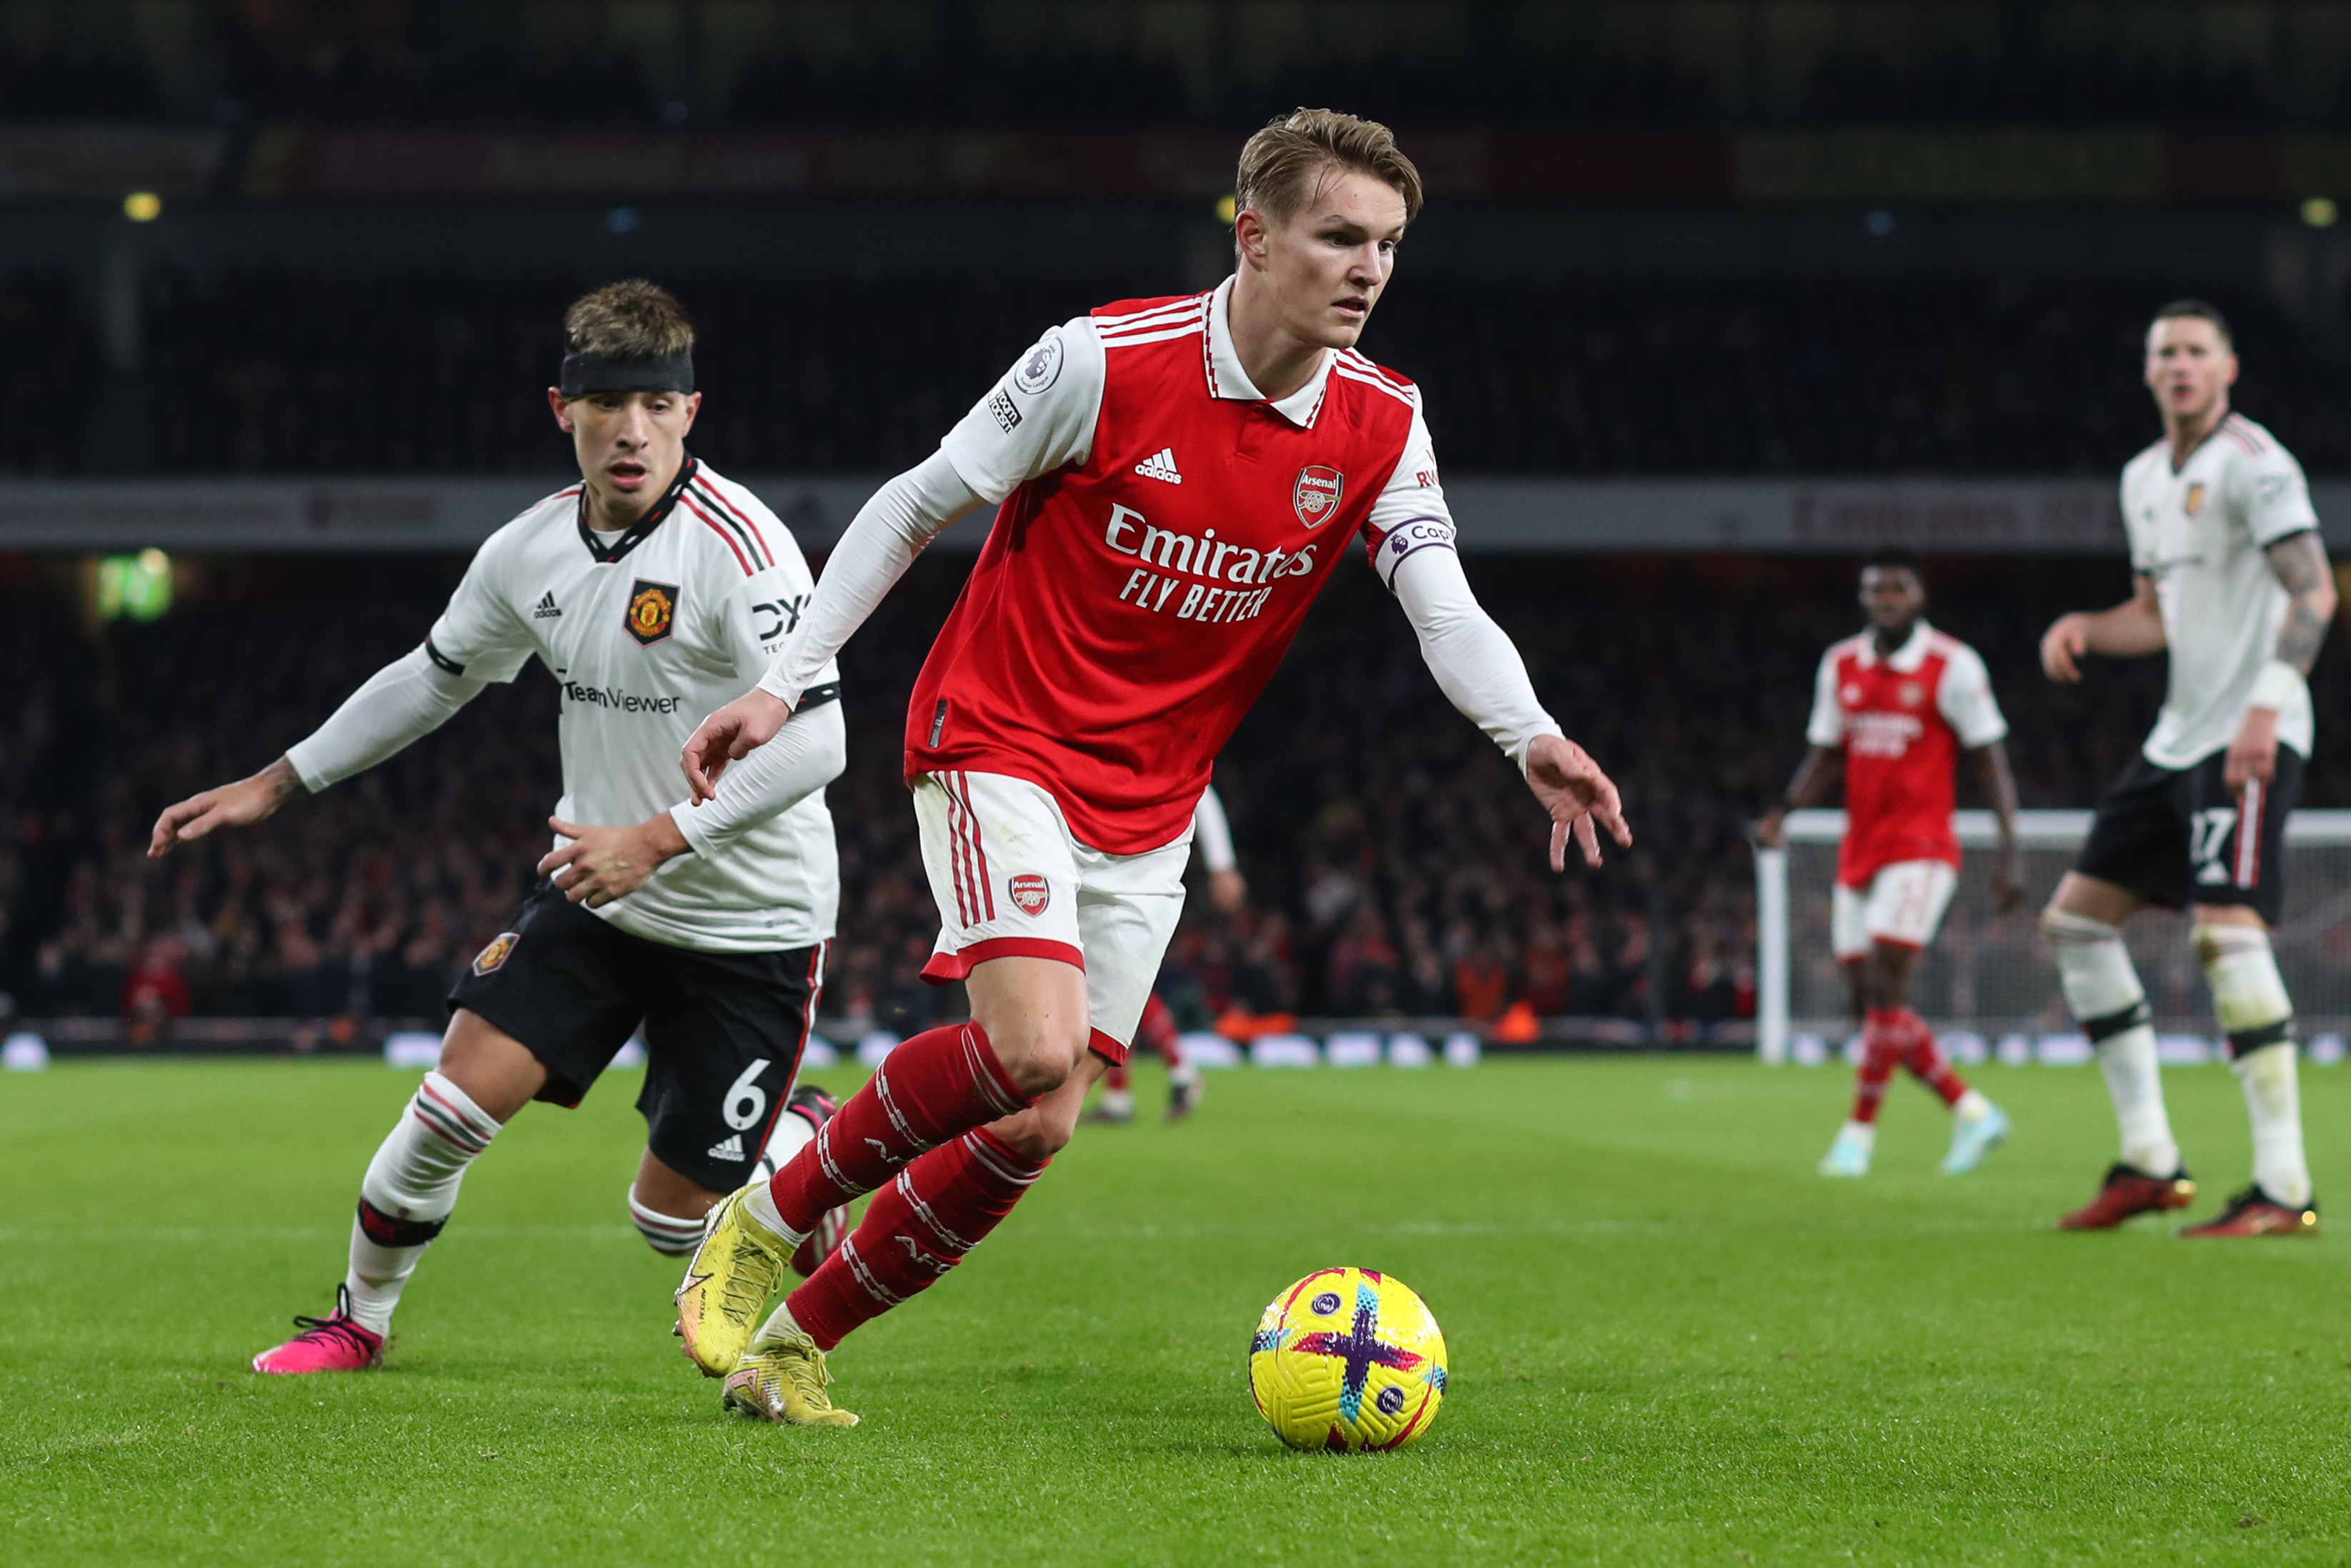 How Martin Odegaard helped lead Arsenal to magnificent triumph over Manchester United 